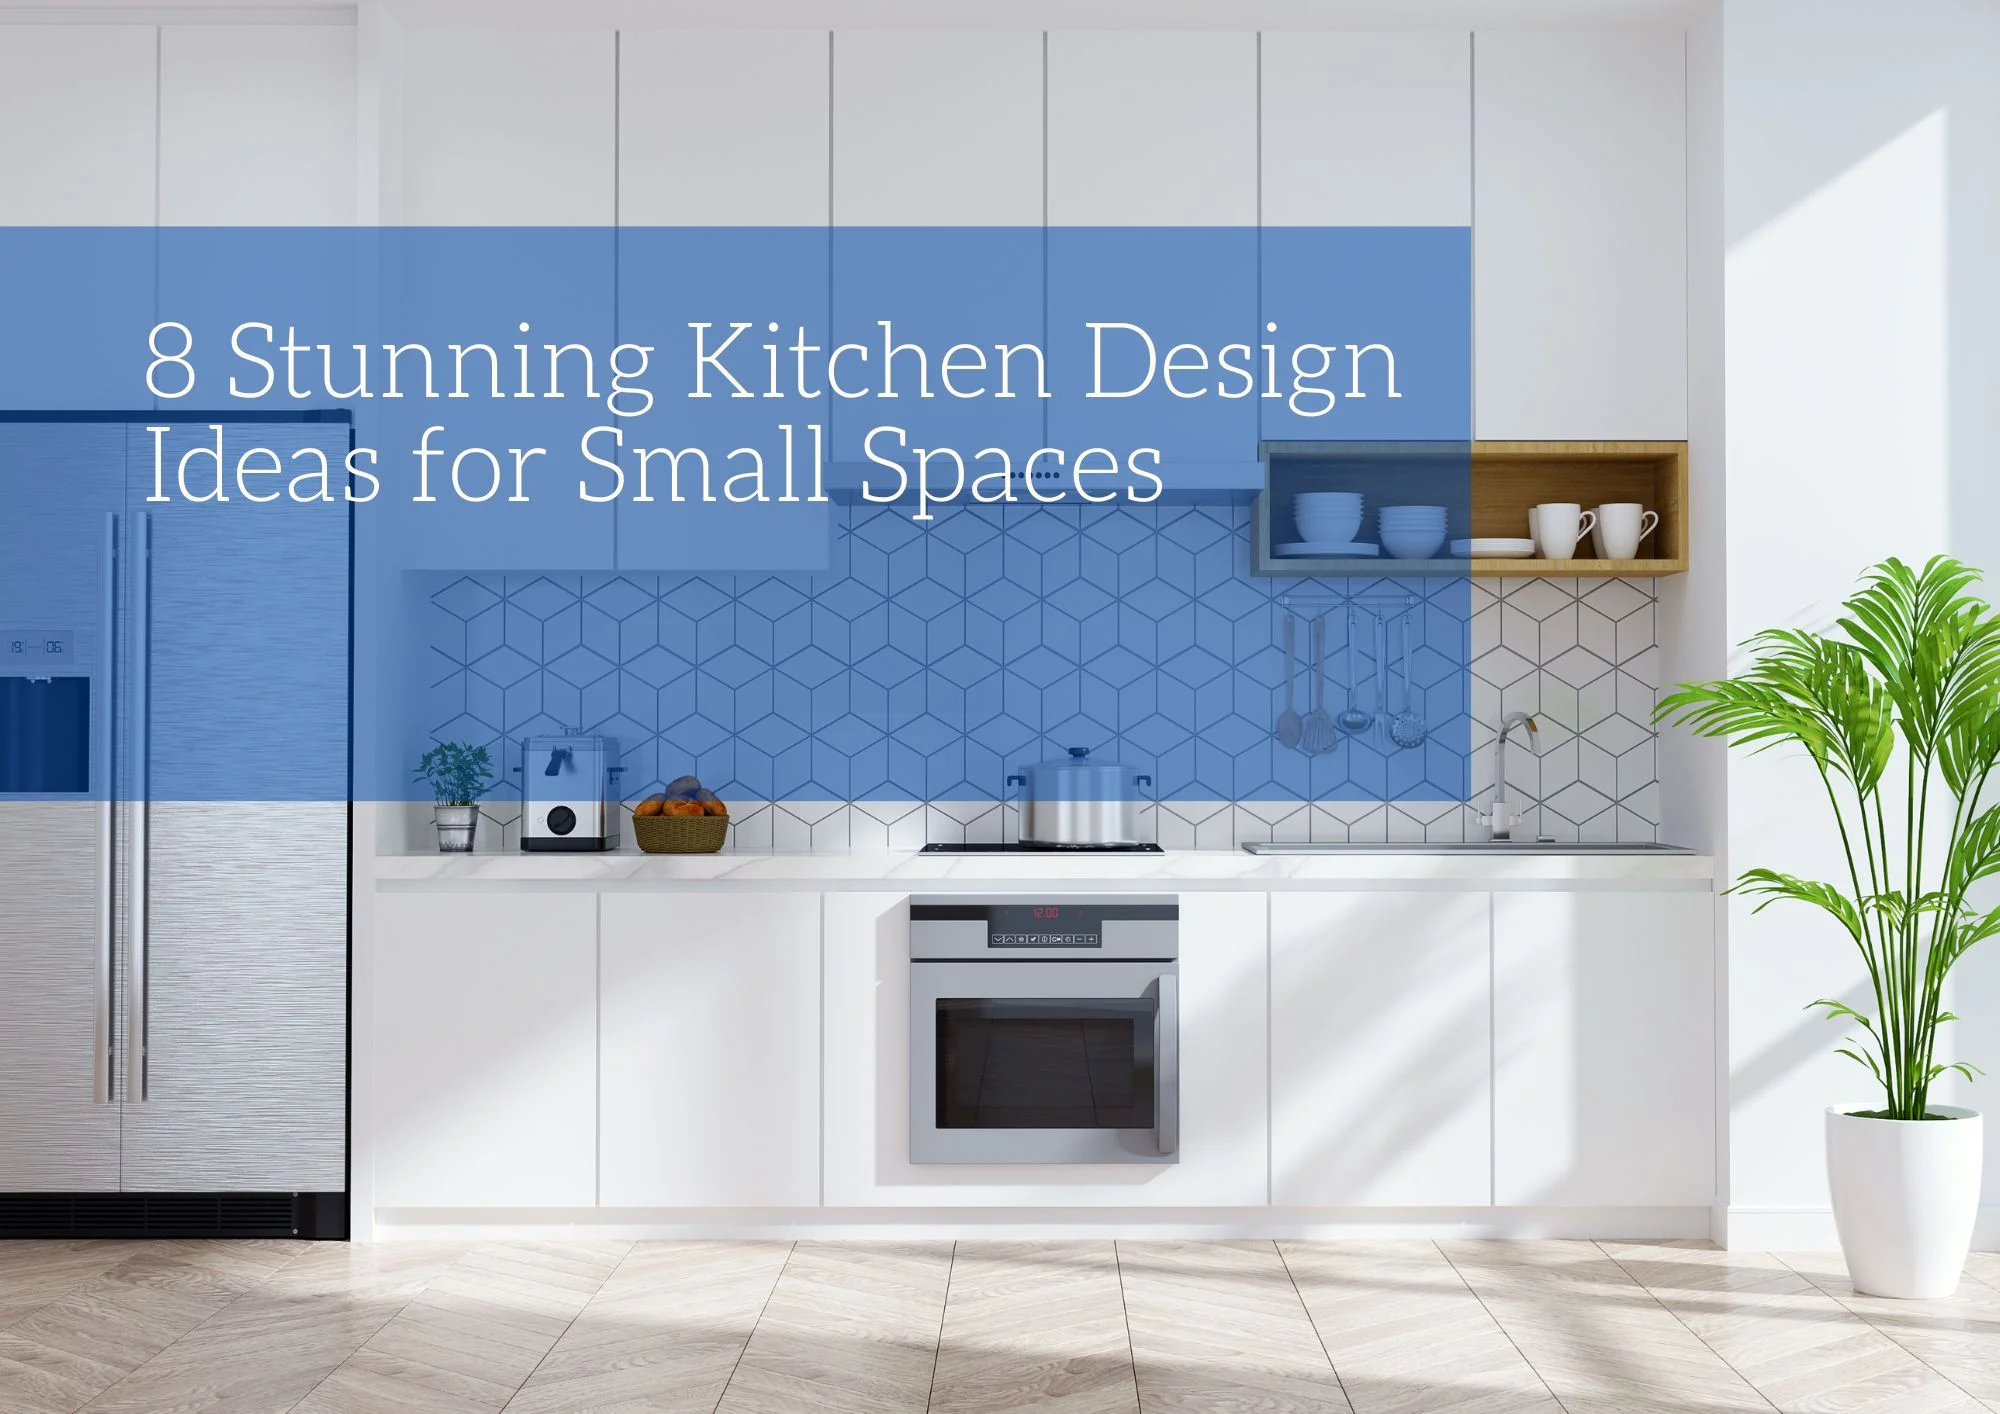 8 Stunning Kitchen Design Ideas for Small Spaces